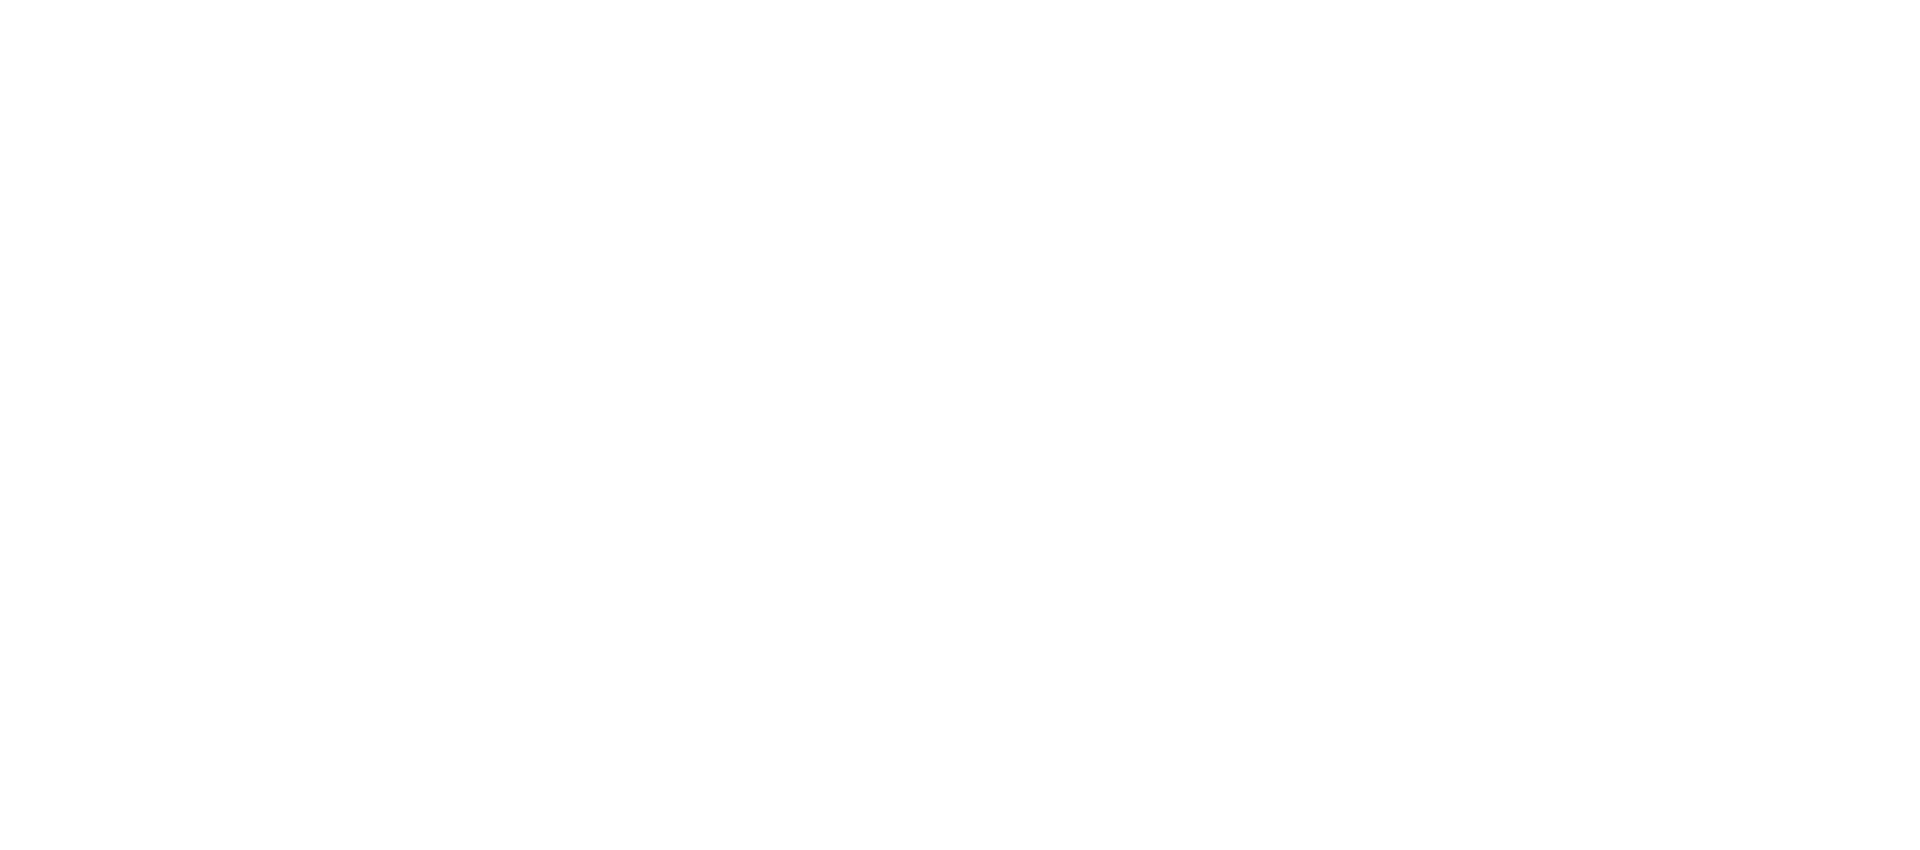 We operate with openness.